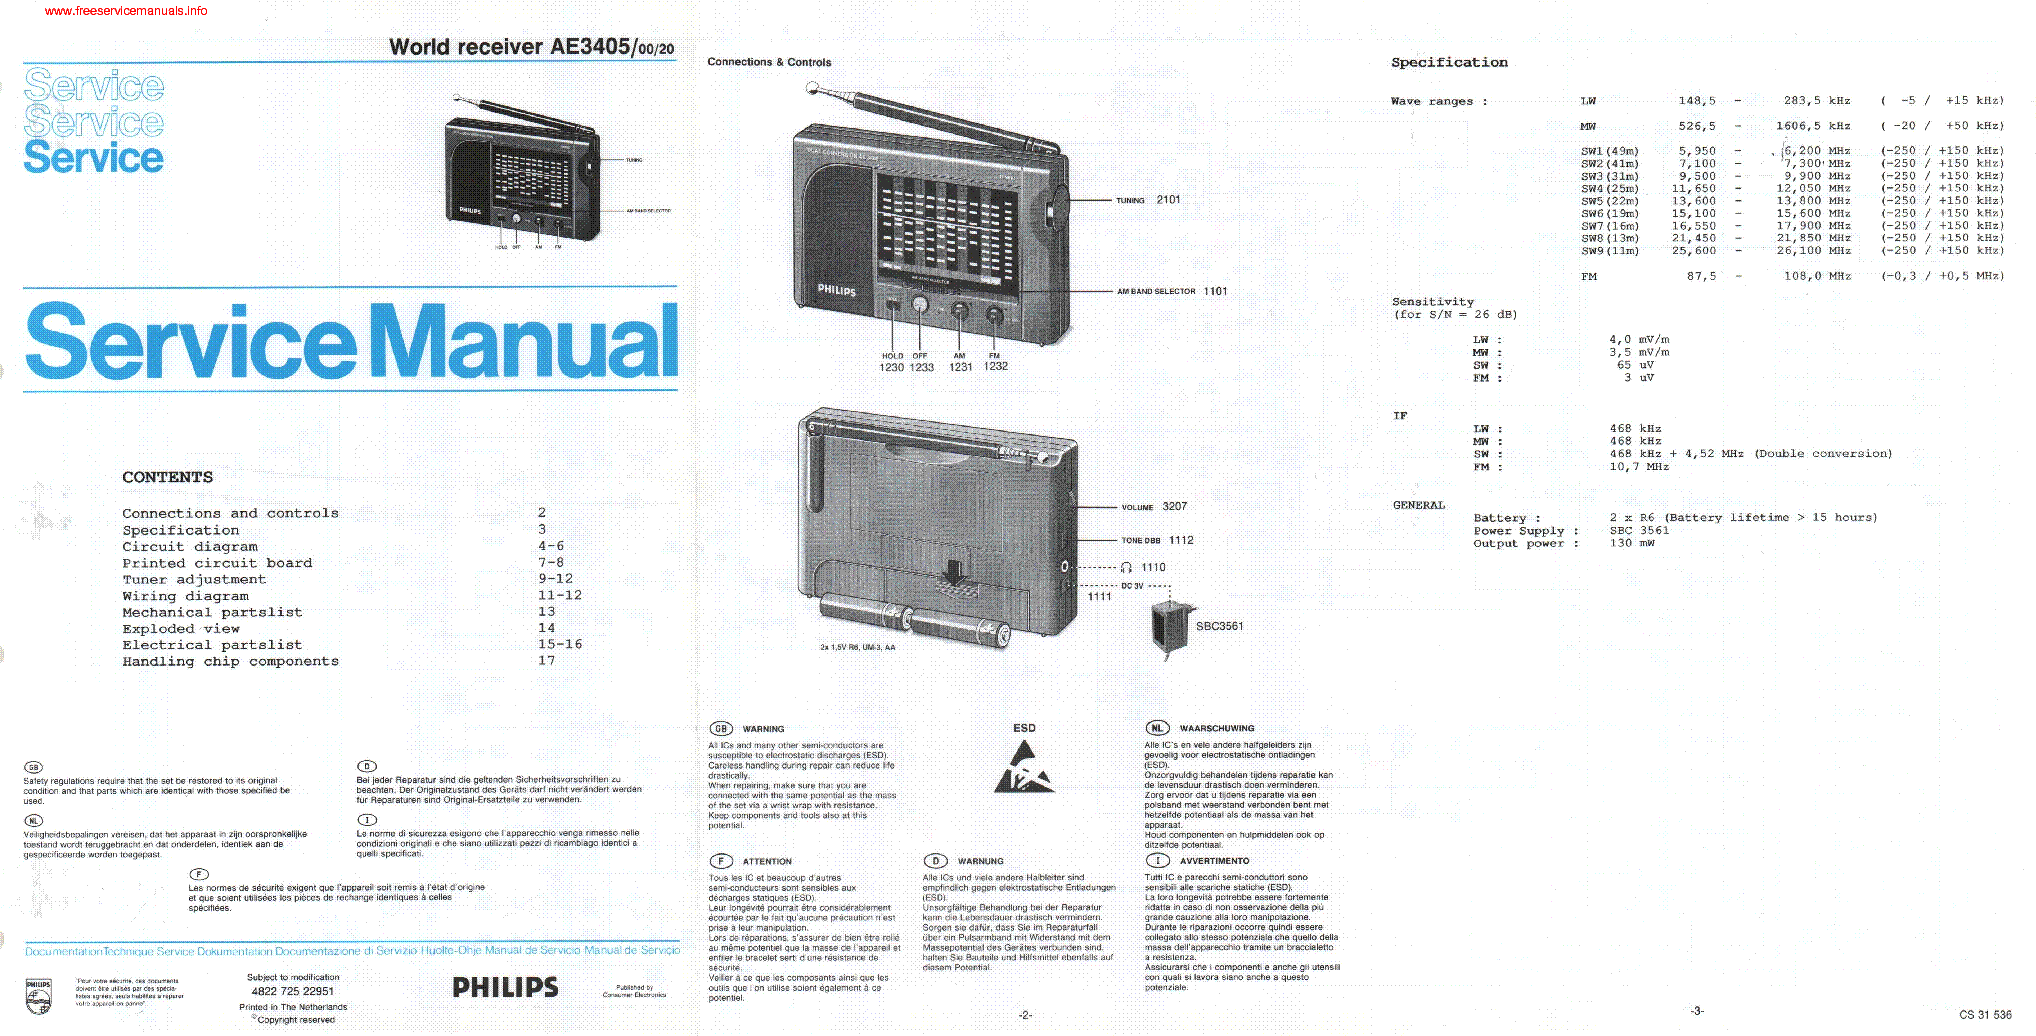 PHILIPS AE3405 00 20 service manual (1st page)